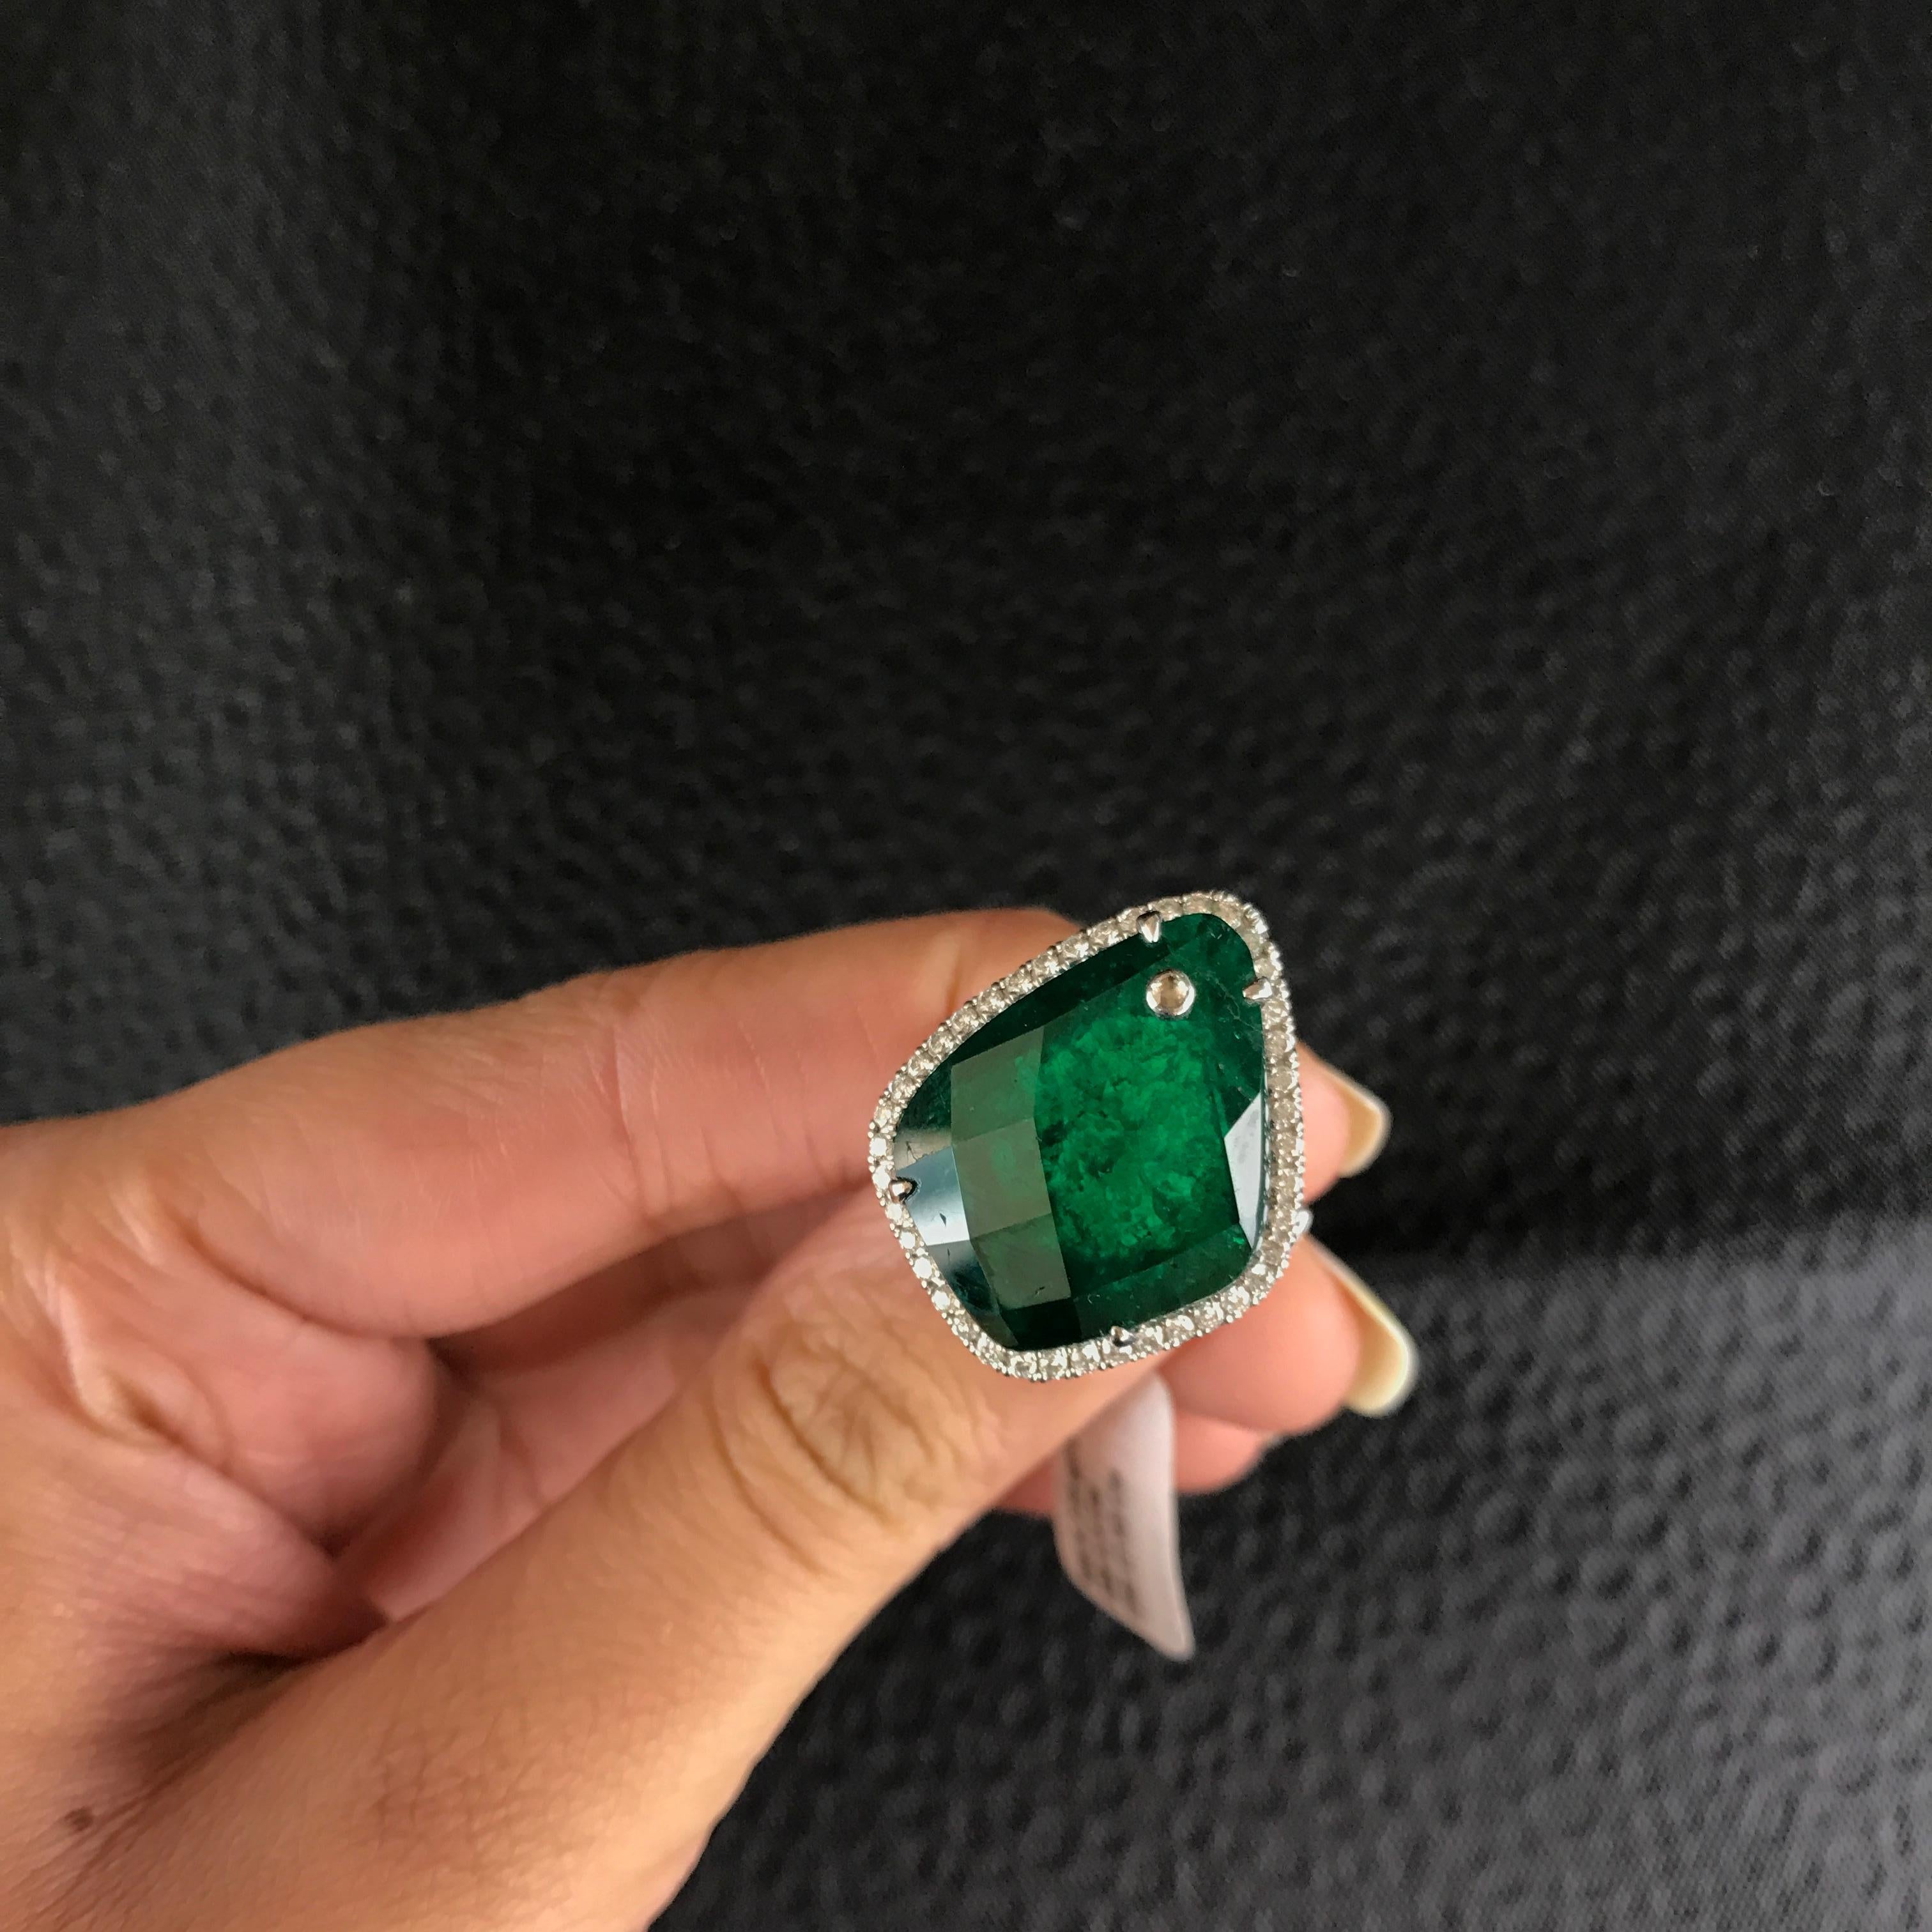 A Unique Fancy Cut Colombian Emerald and Diamond Cocktail Ring on 18K White Gold band

Center Stone Details:  
Stone: Colombian Emerald
Cut: Oval Weight: 22.43 carat

Diamond Details:
Cut: Brilliant (round) 
Total Carat Weight: 1.32 carat 
Quality: